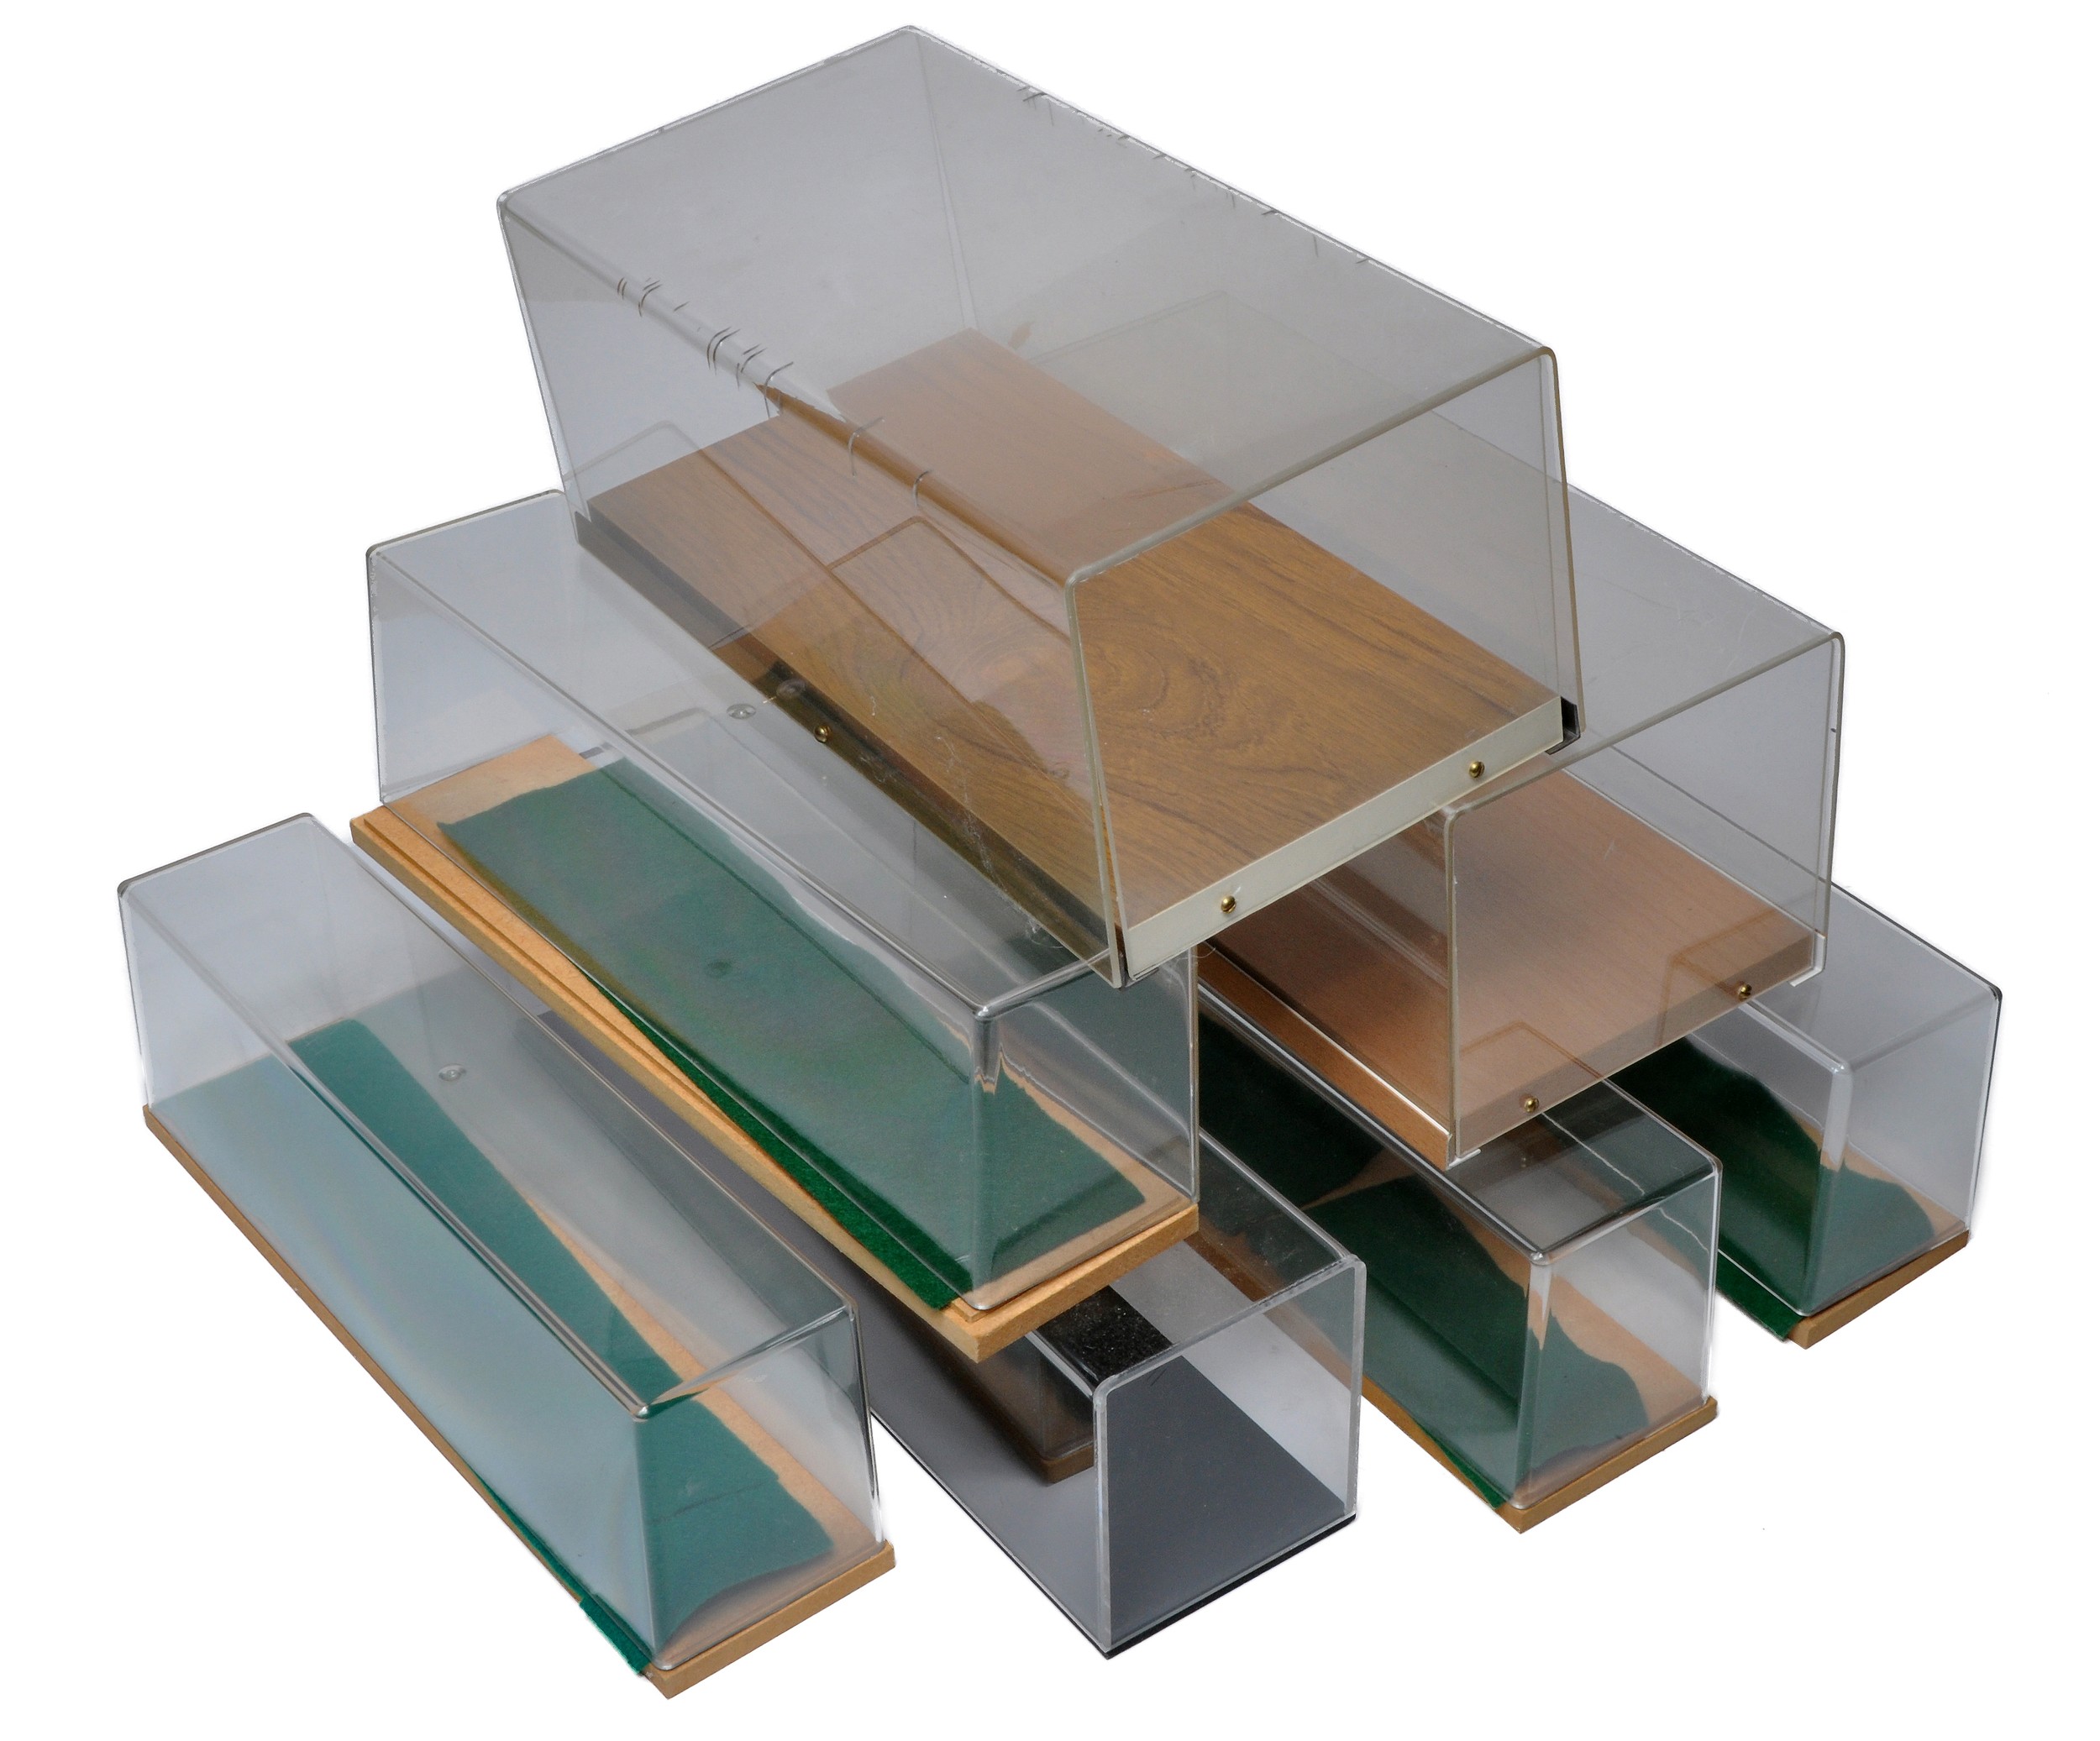 A quantity of model display / presentation cases, various sizes, as shown.